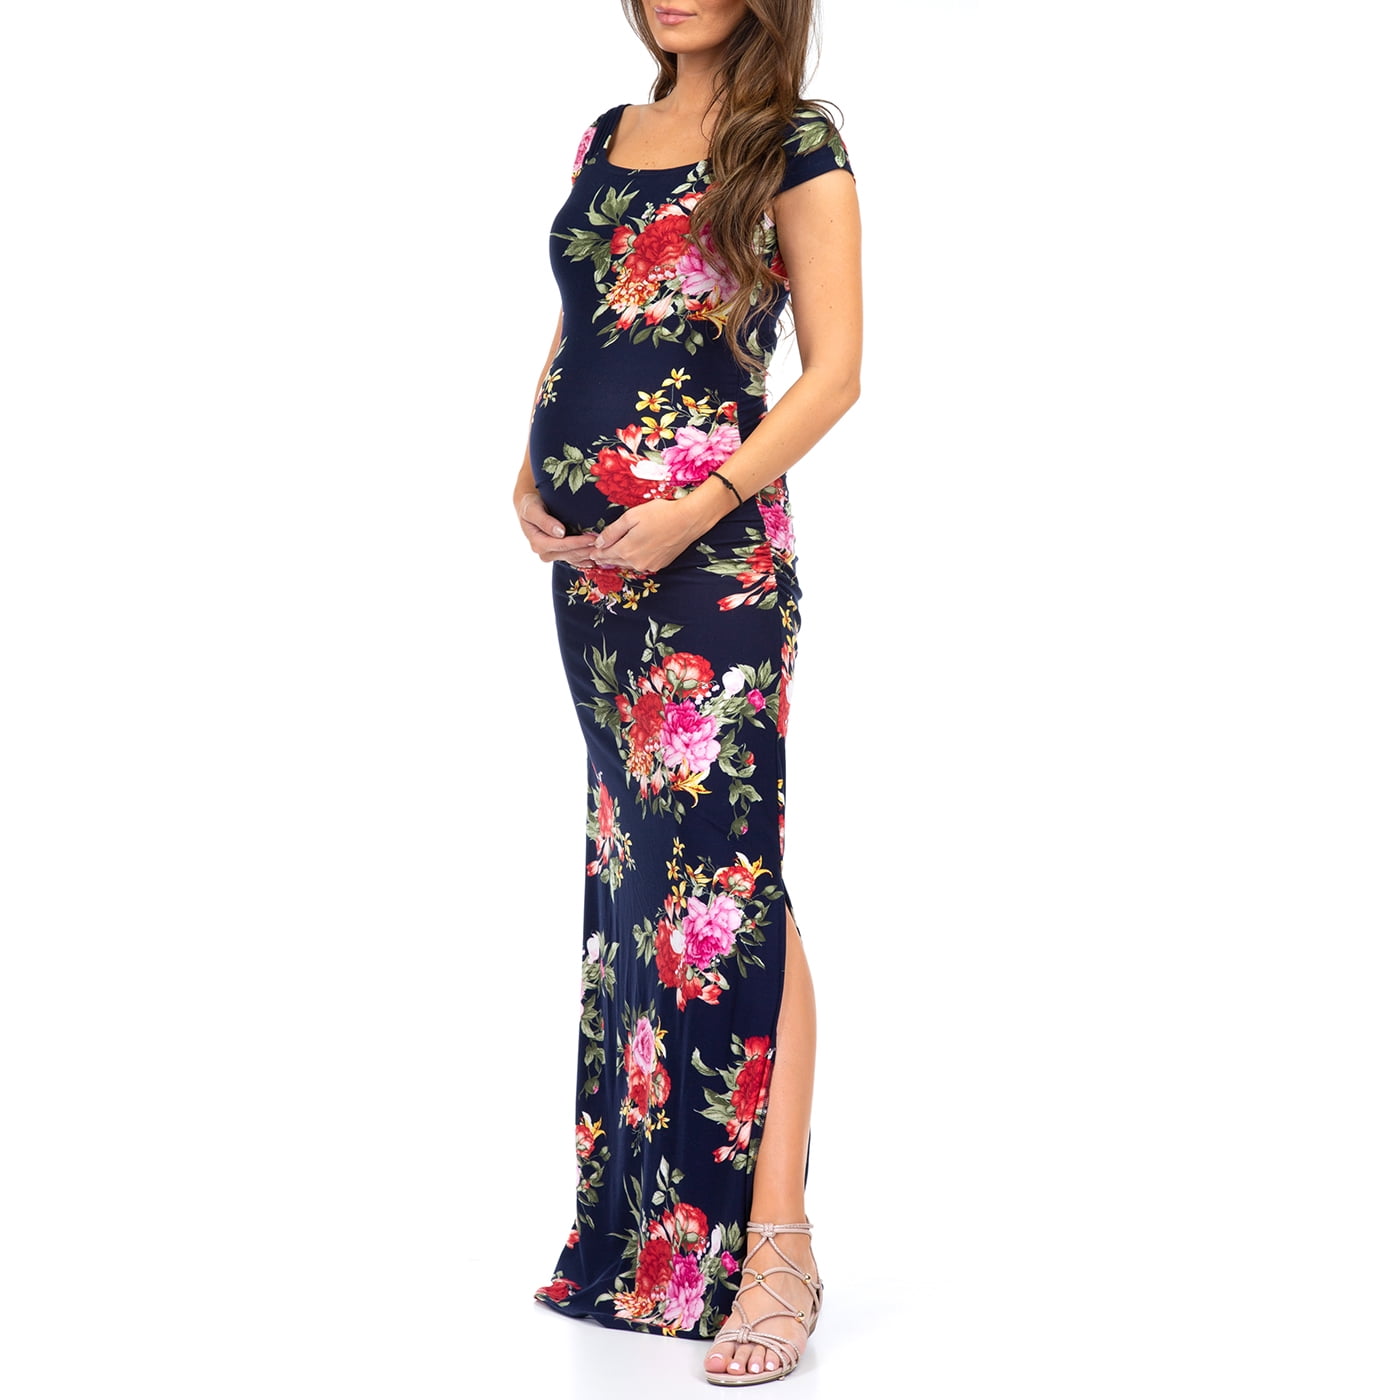 Mother Bee Maternity Ruched Bodycon Maternity Dress for Baby Shower or Casual Wear Made in USA 